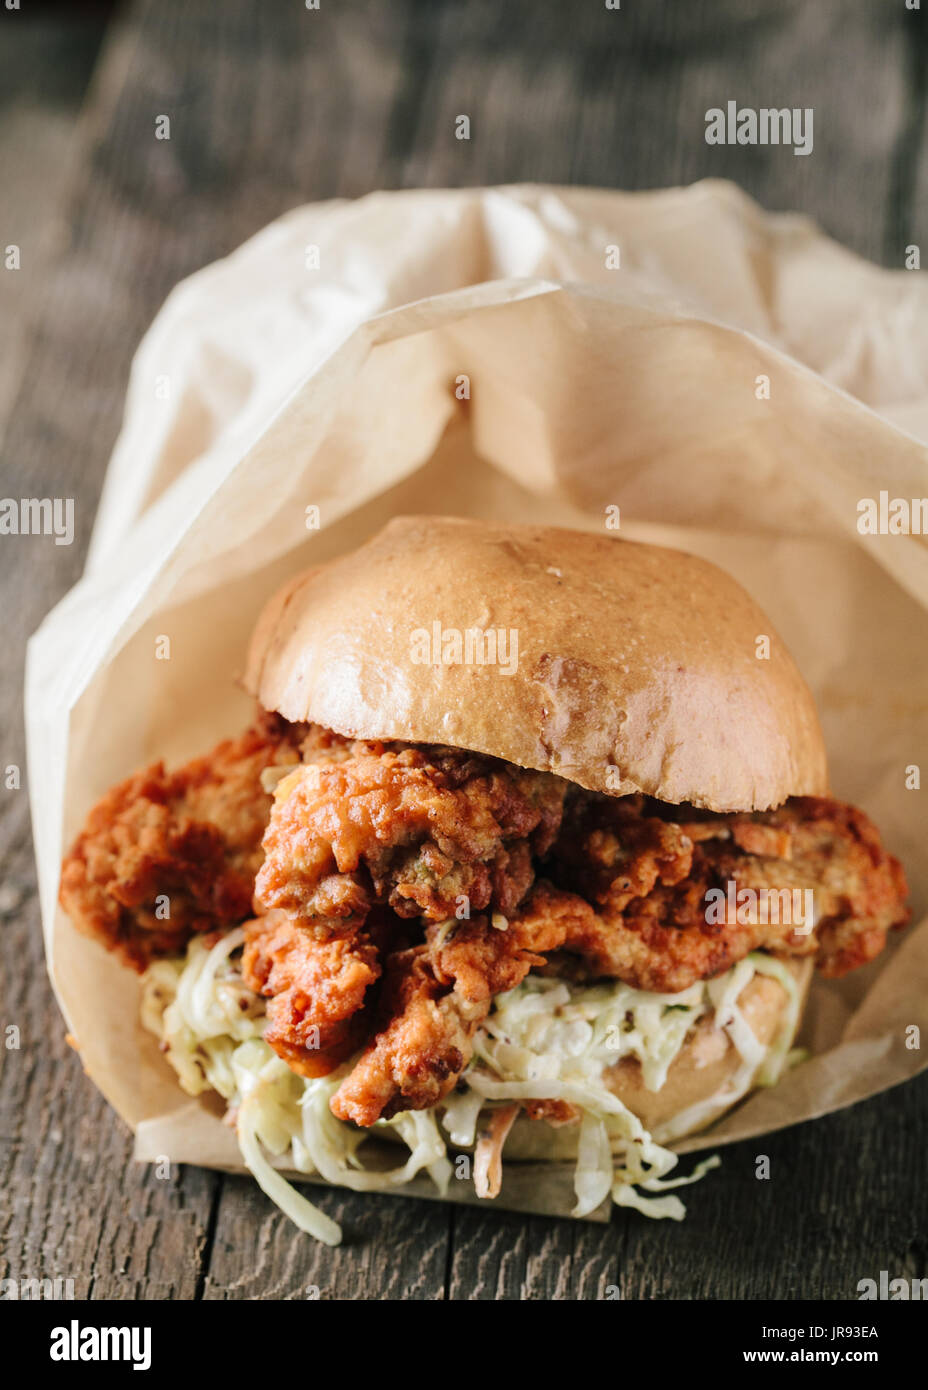 Fried boneless chicken sandwich with coleslaw on wooden surface Stock Photo